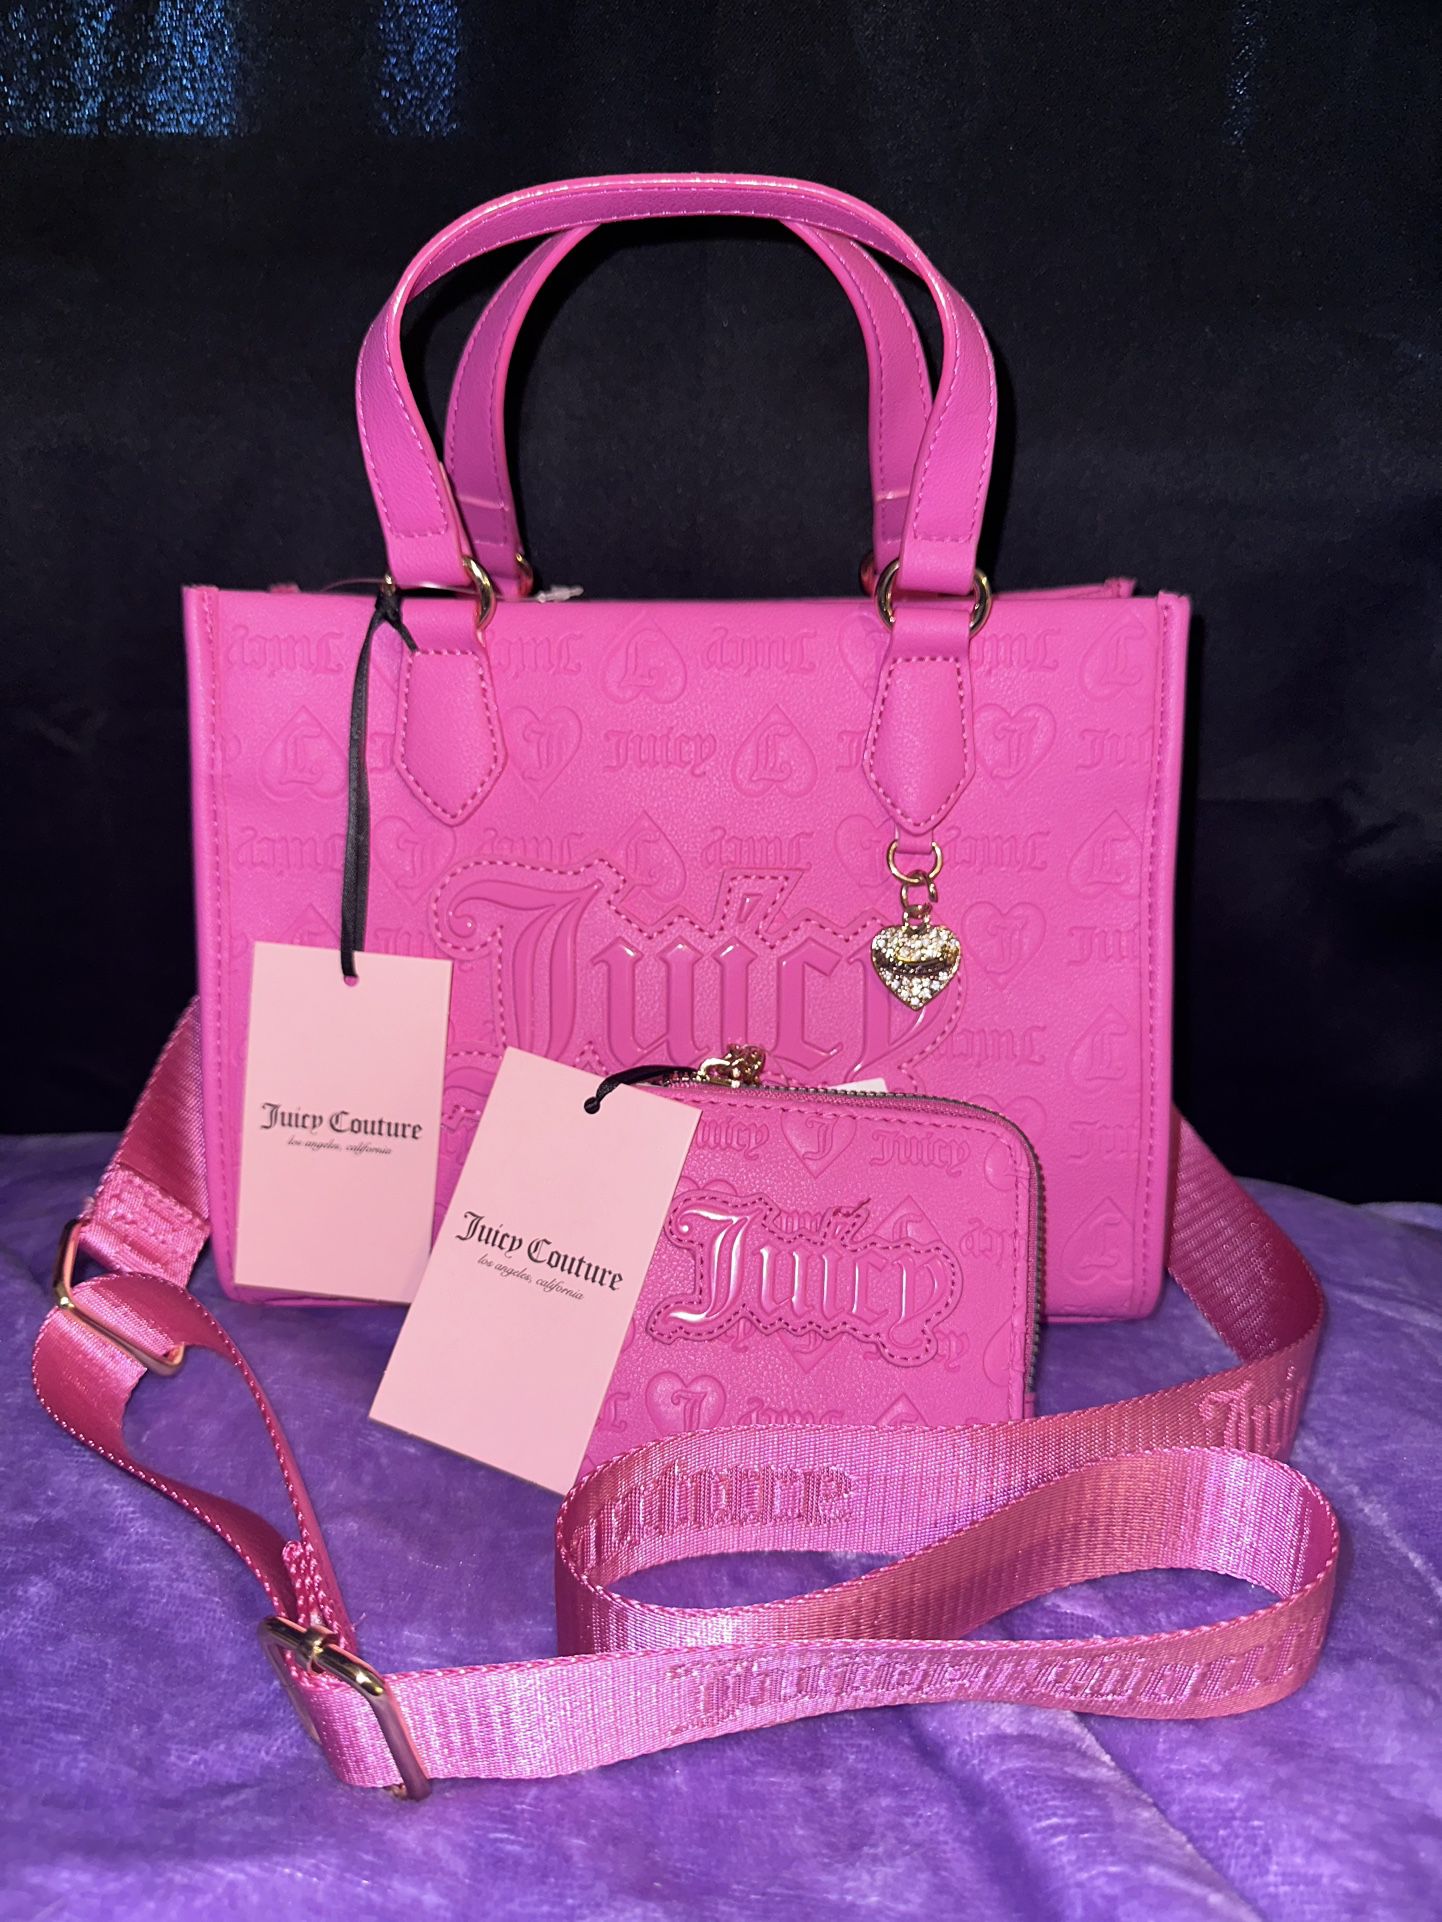 Juicy Couture Upgrade U Mini Tote and Wallet